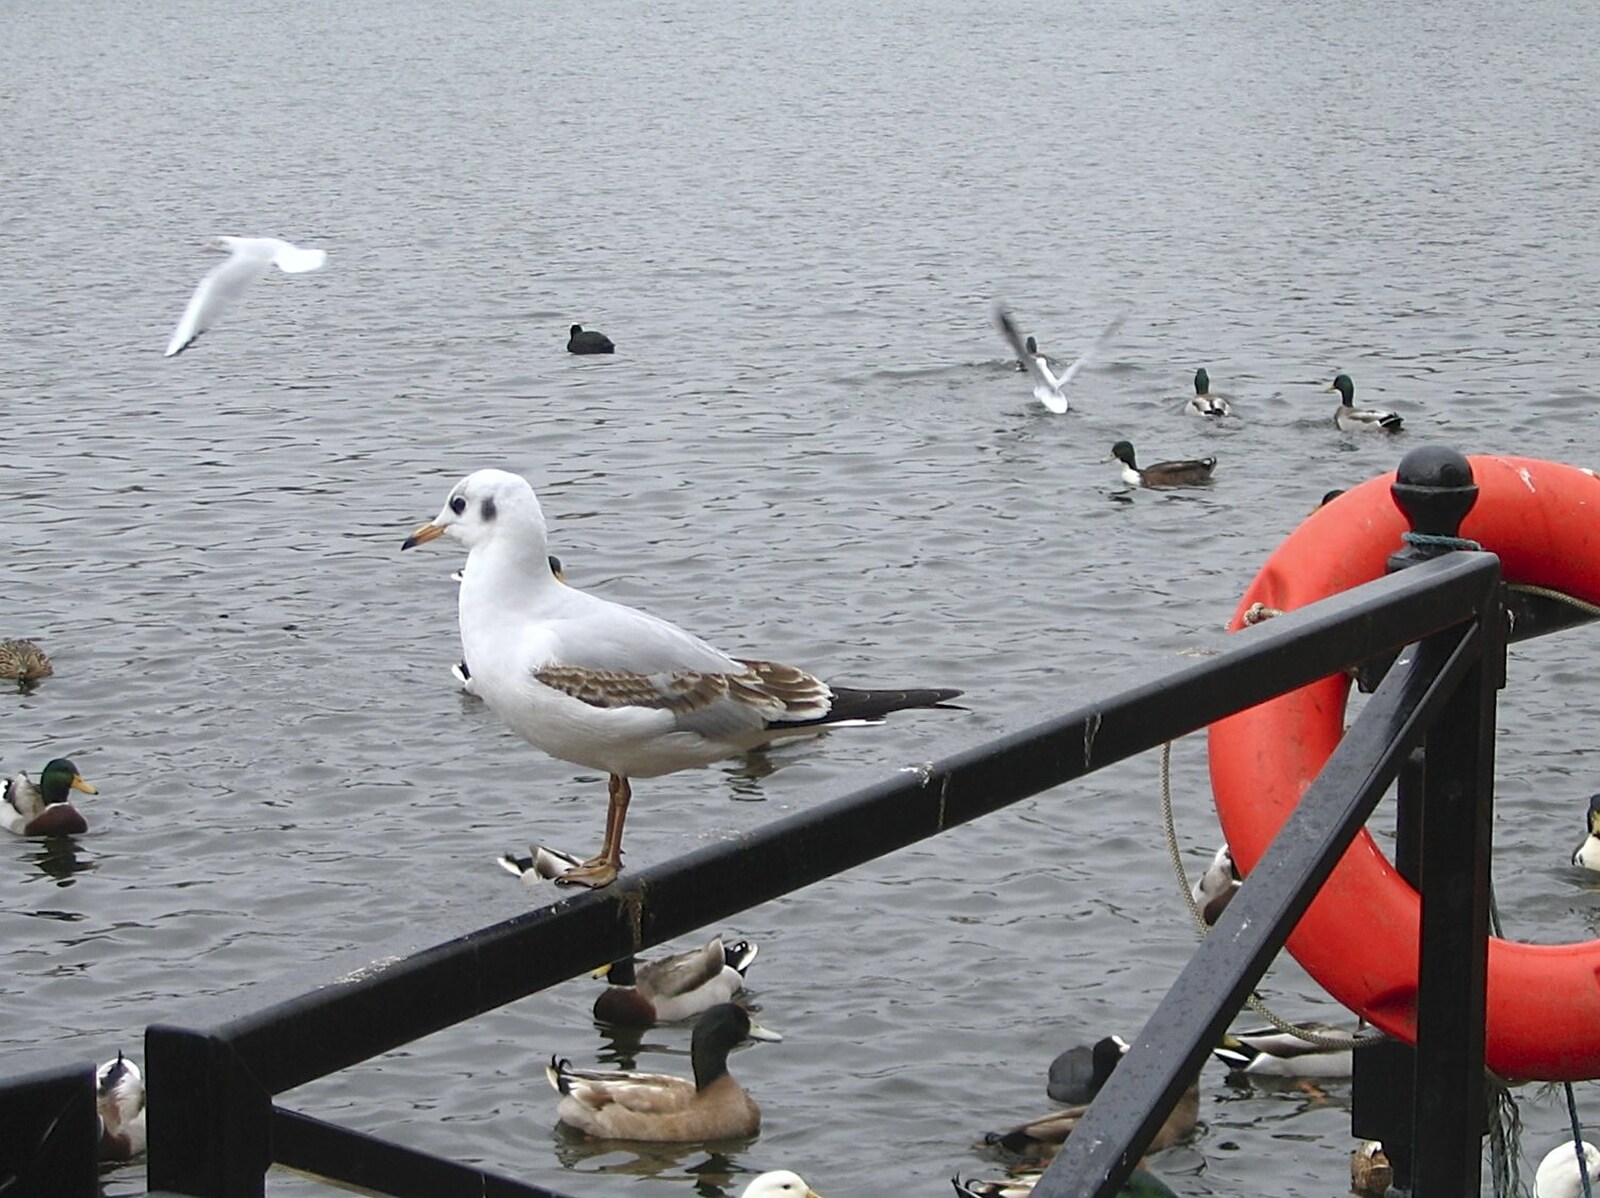 A seagull perches from Feeding the Ducks: a Diss and Norwich Miscellany - 7th November 2004